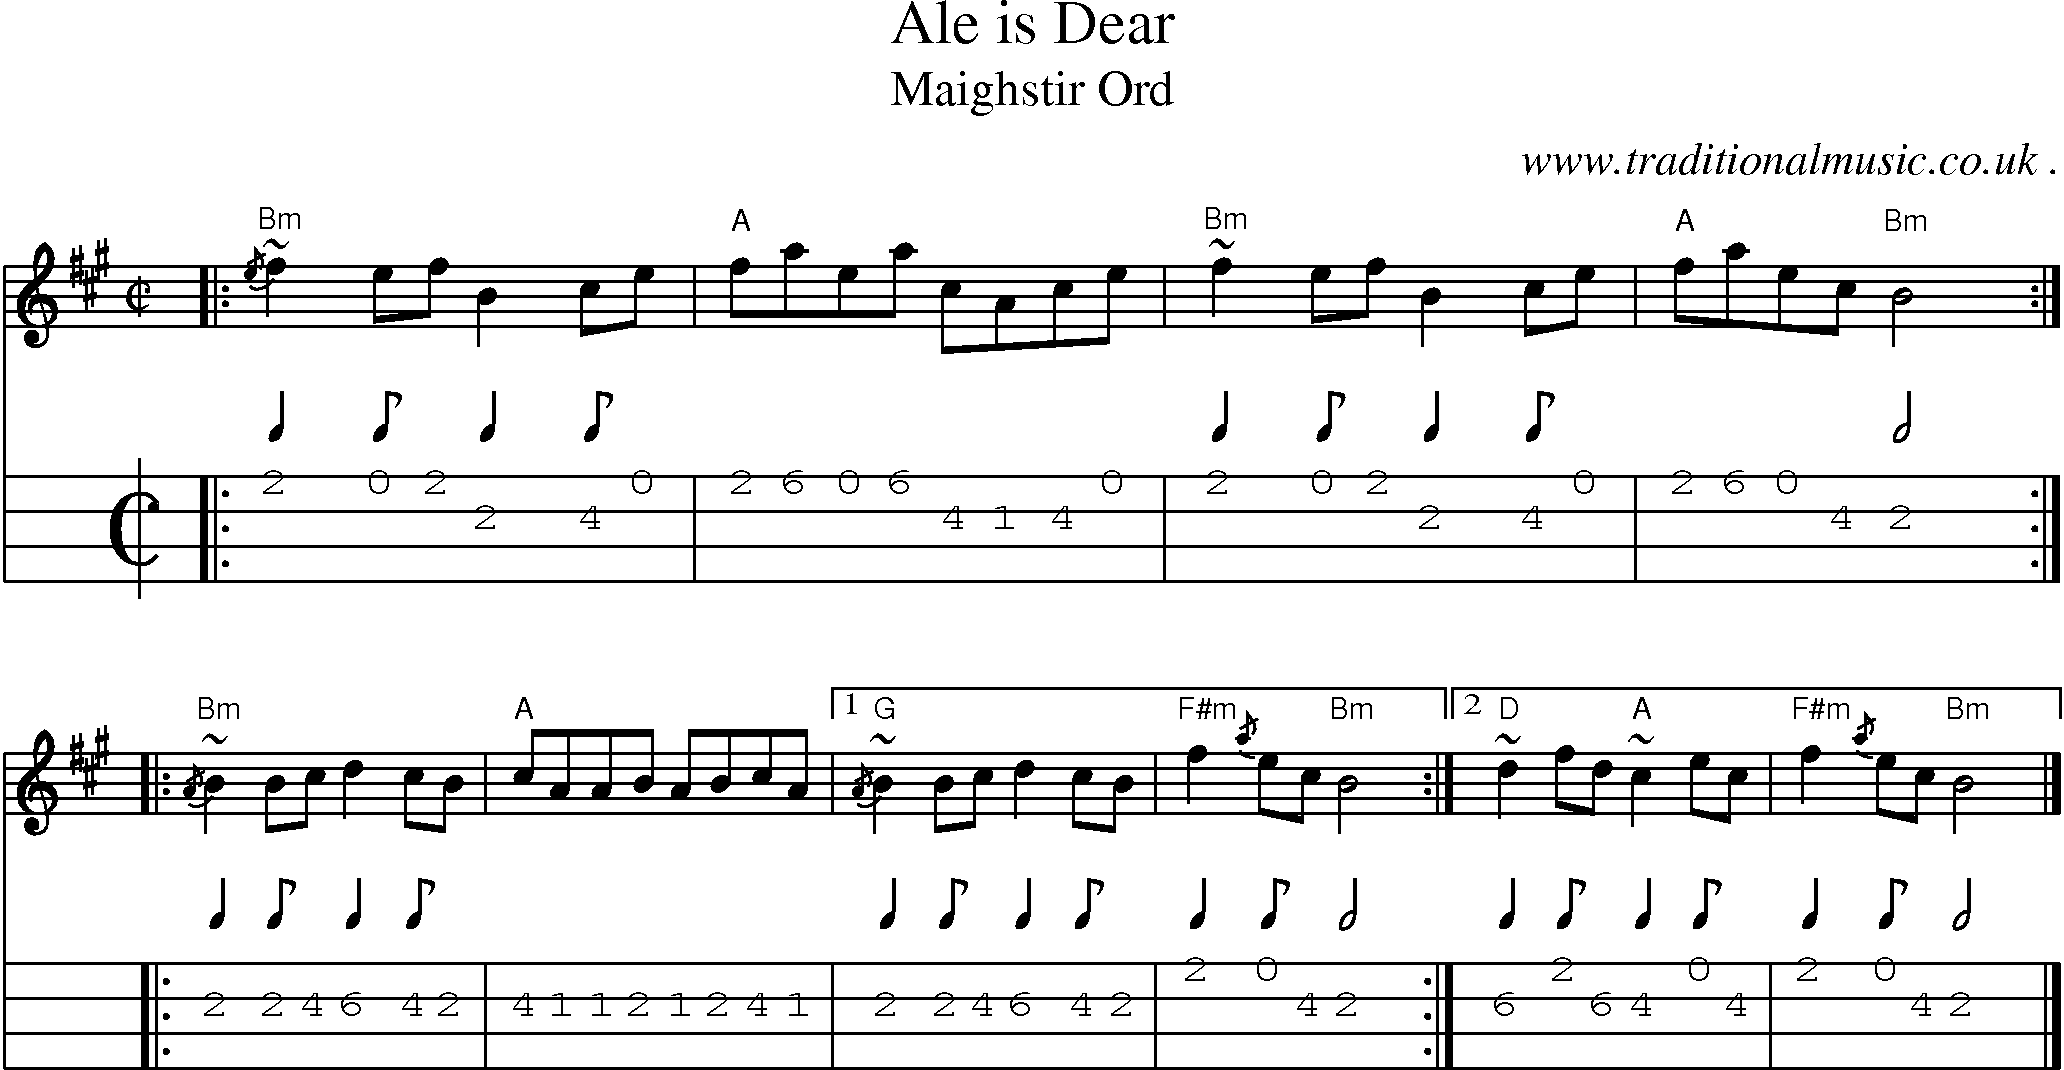 Sheet-music  score, Chords and Mandolin Tabs for Ale Is Dear